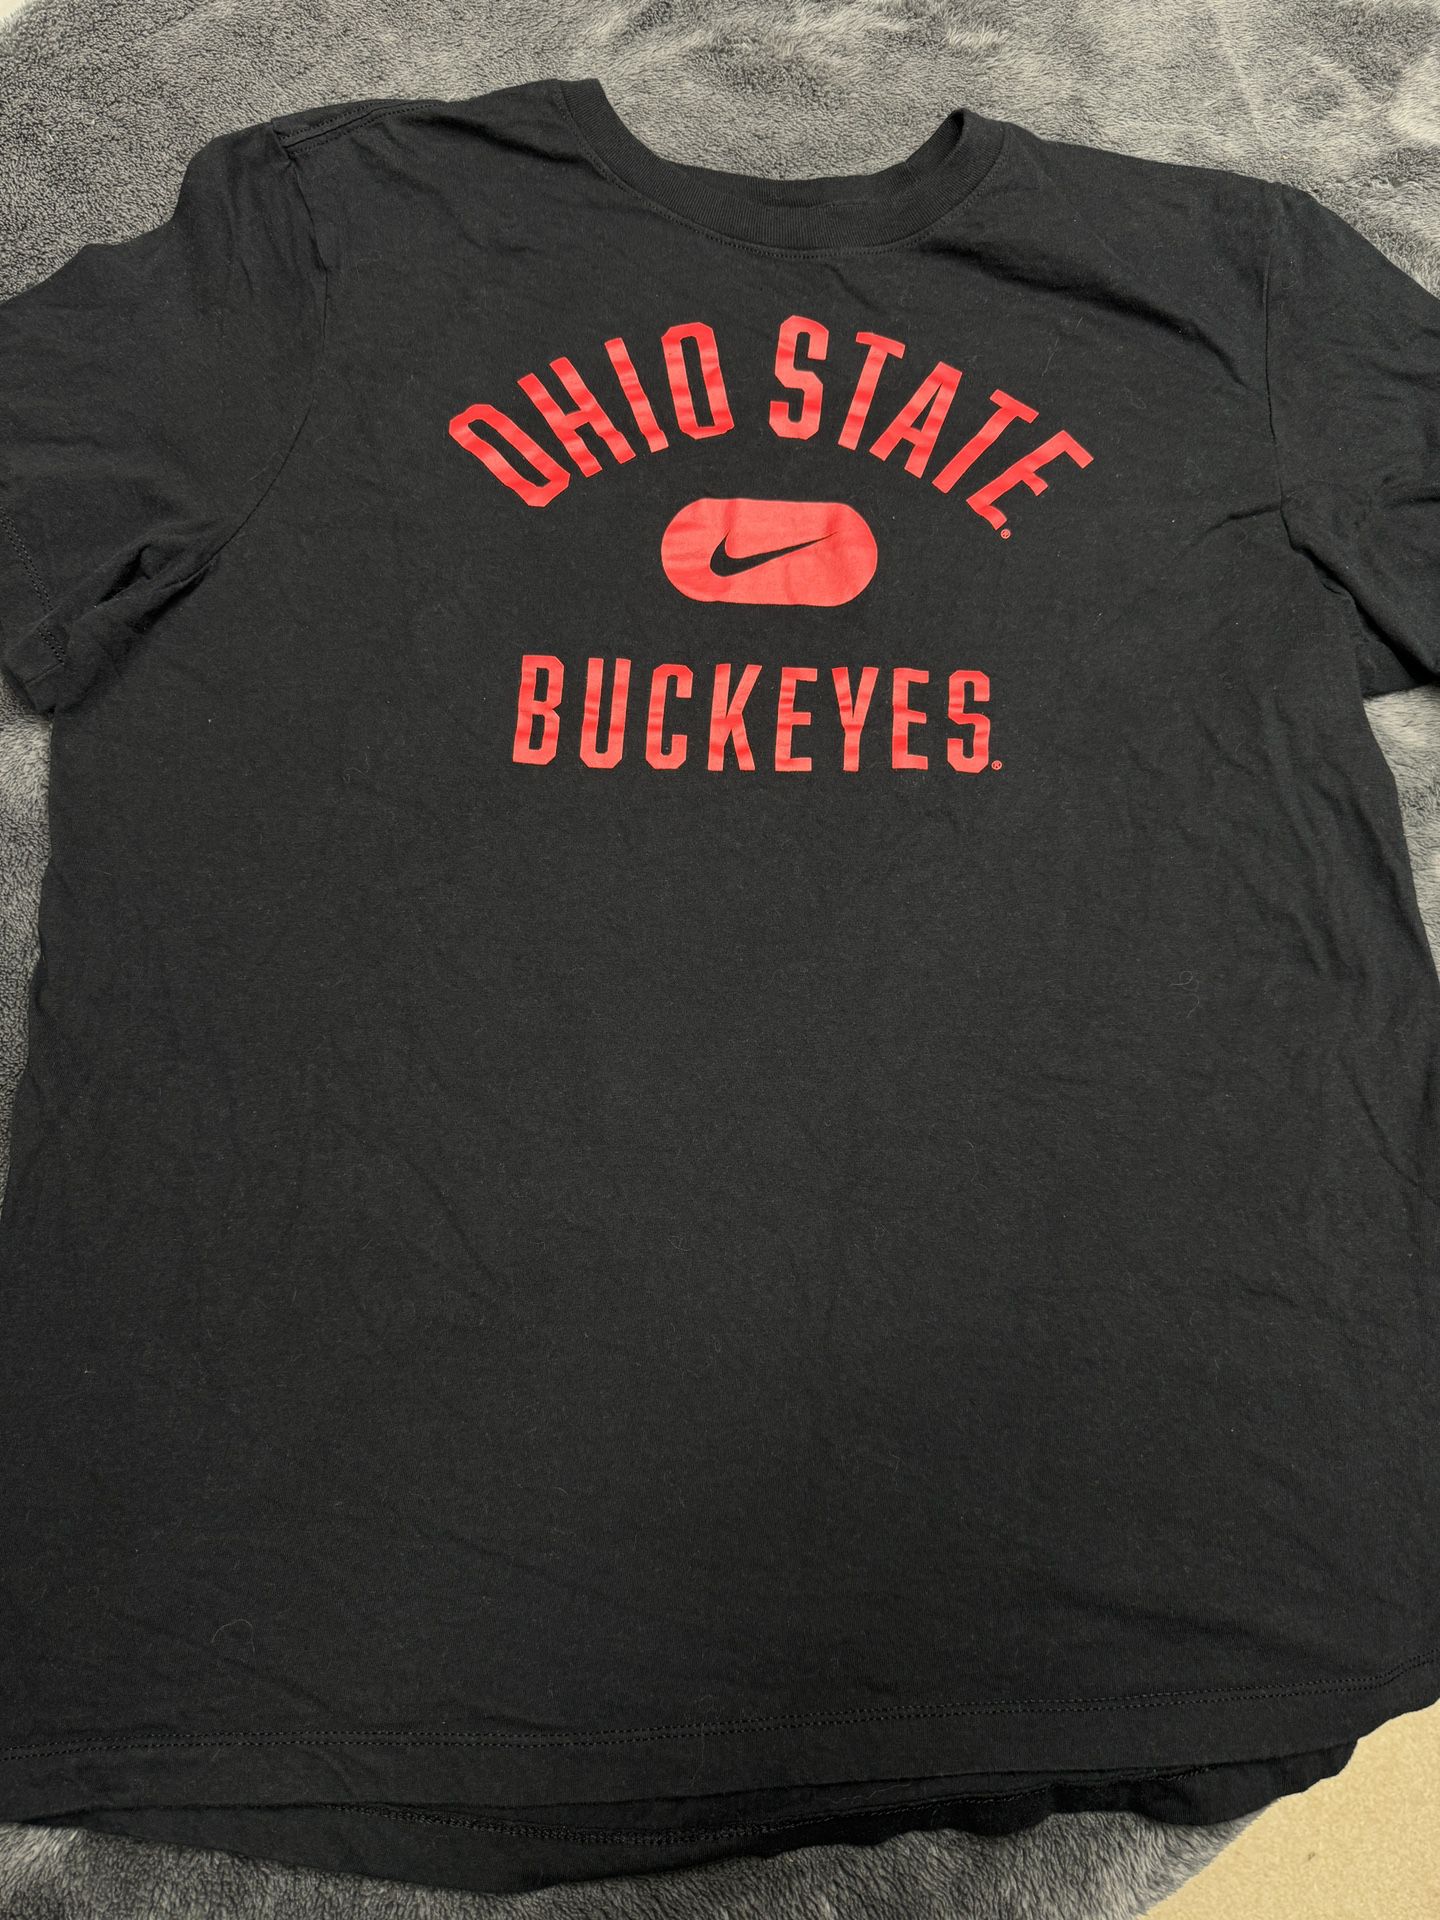 Nike Ohio State Men’s XL T-Shirt- Like New, only worn once.  